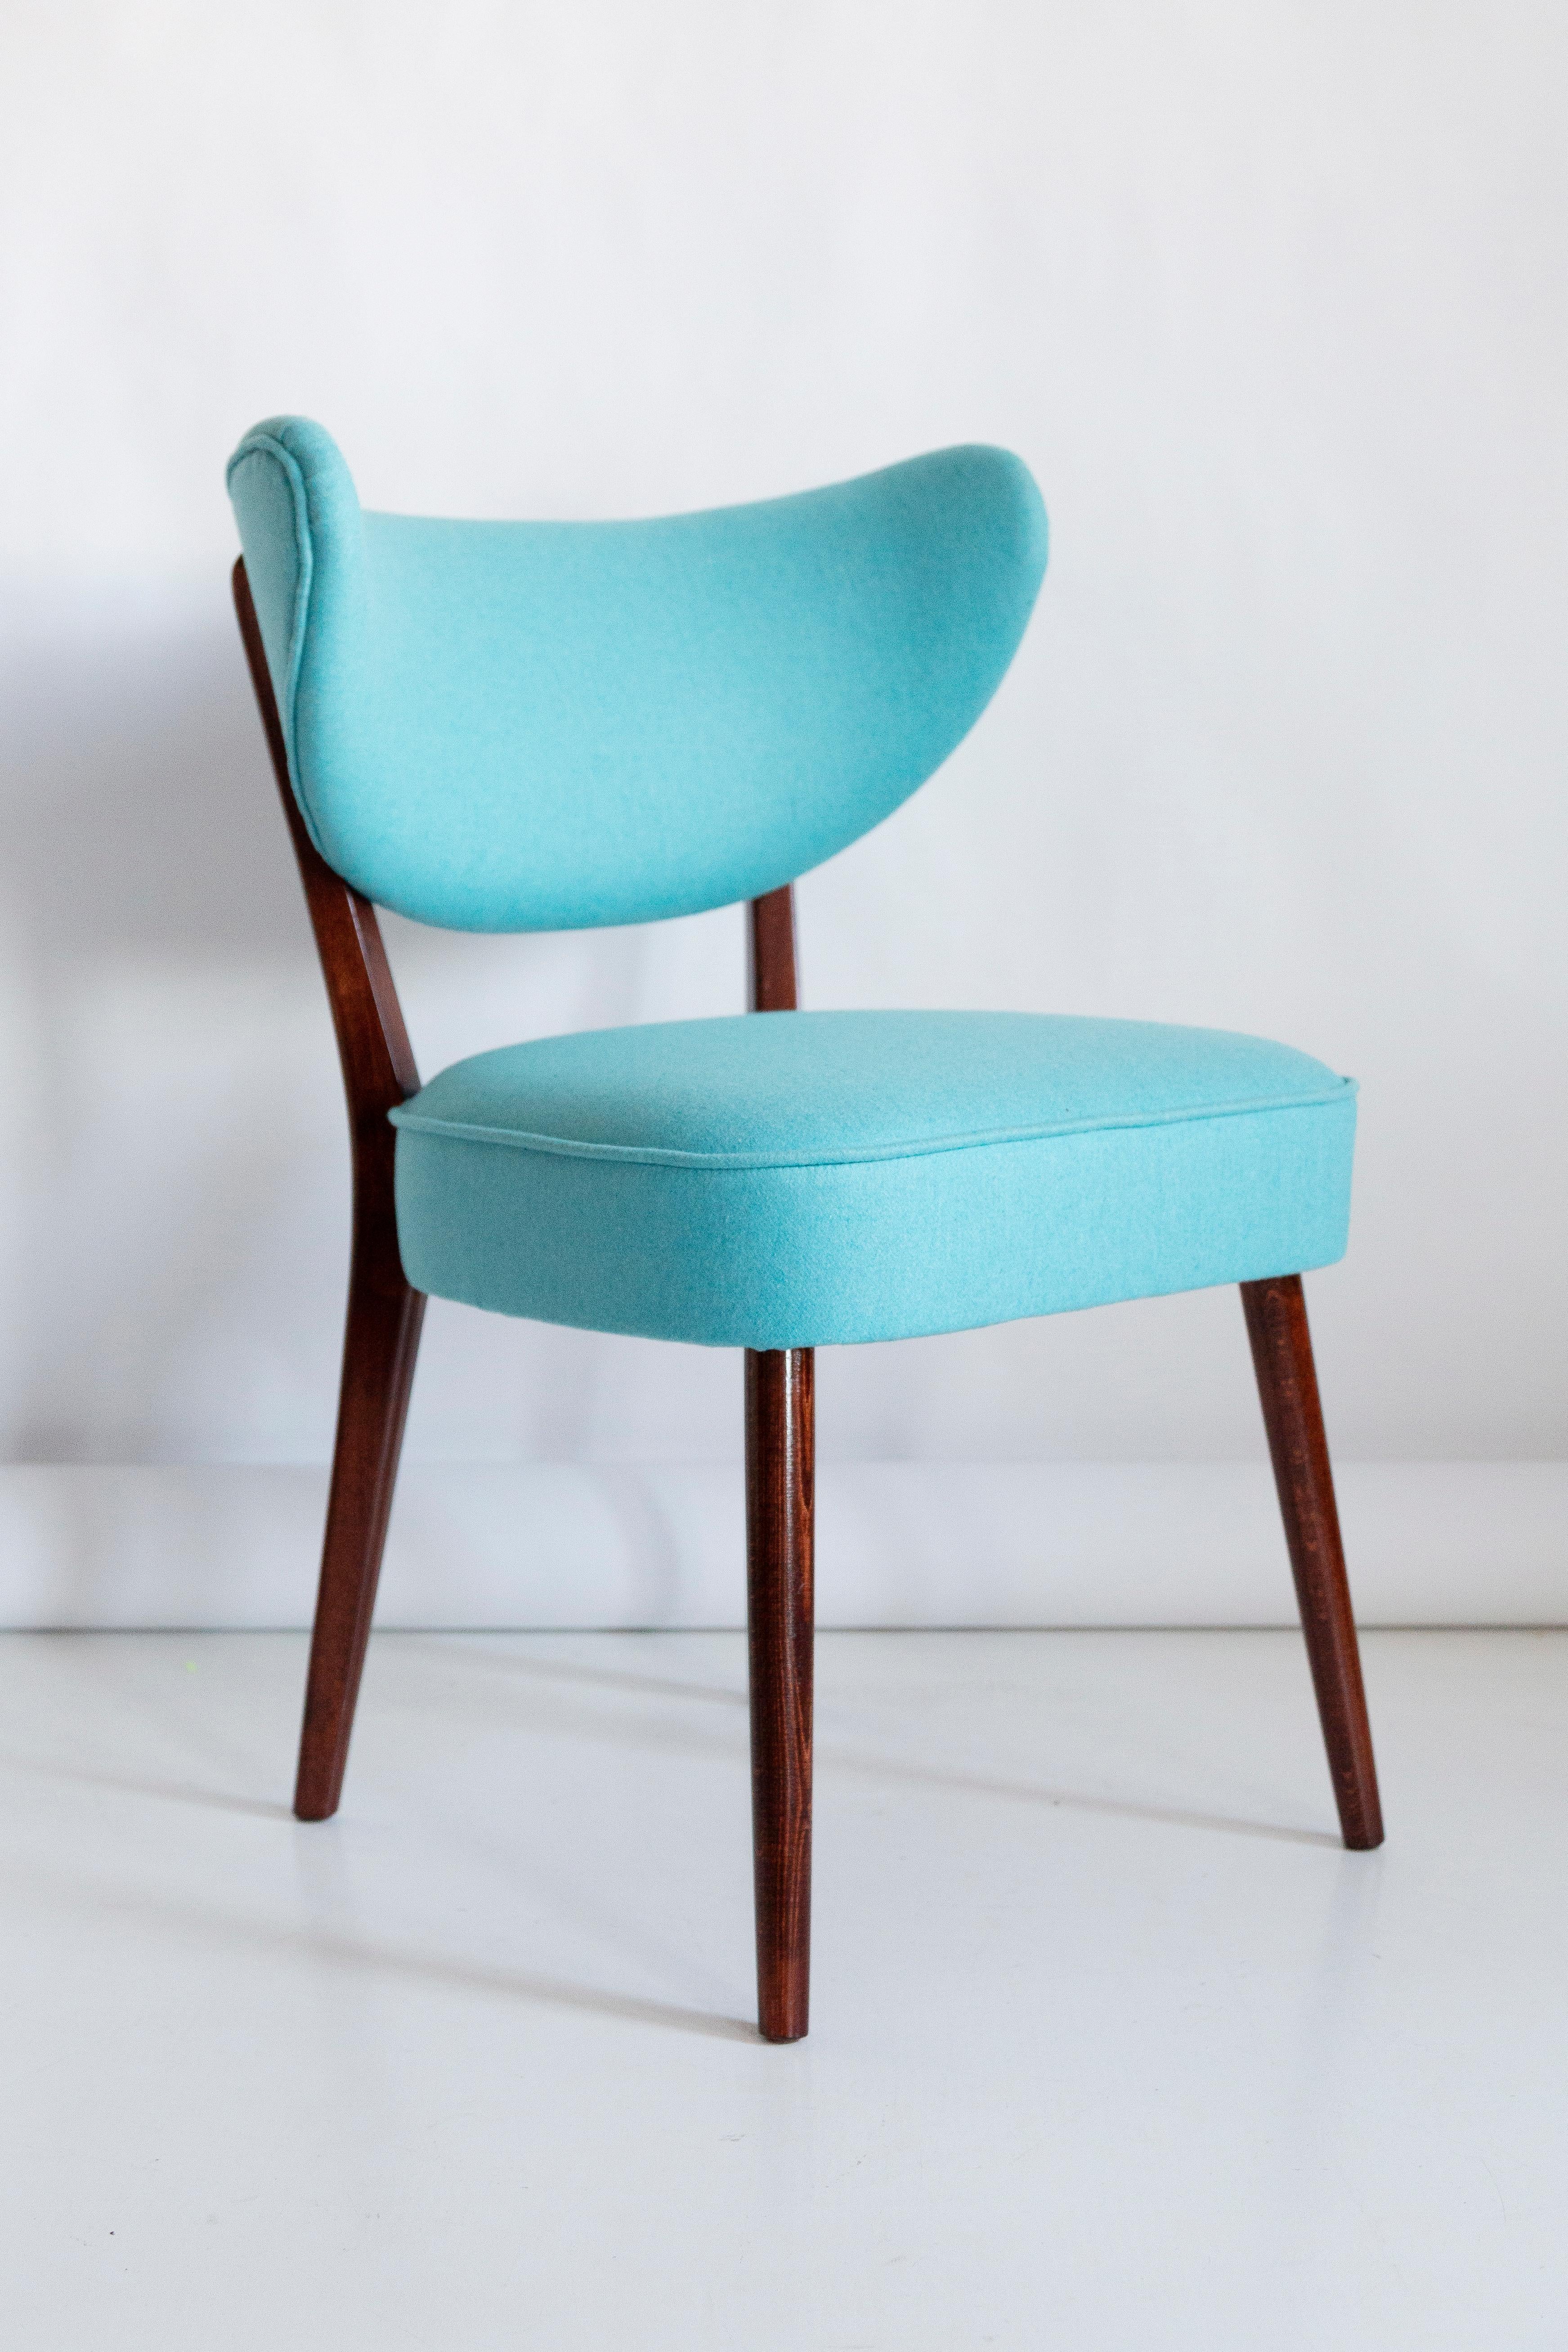 Hand-Crafted Shell Dining Chair, Turquoise Wool, by Vintola Studio, Europe, Poland For Sale